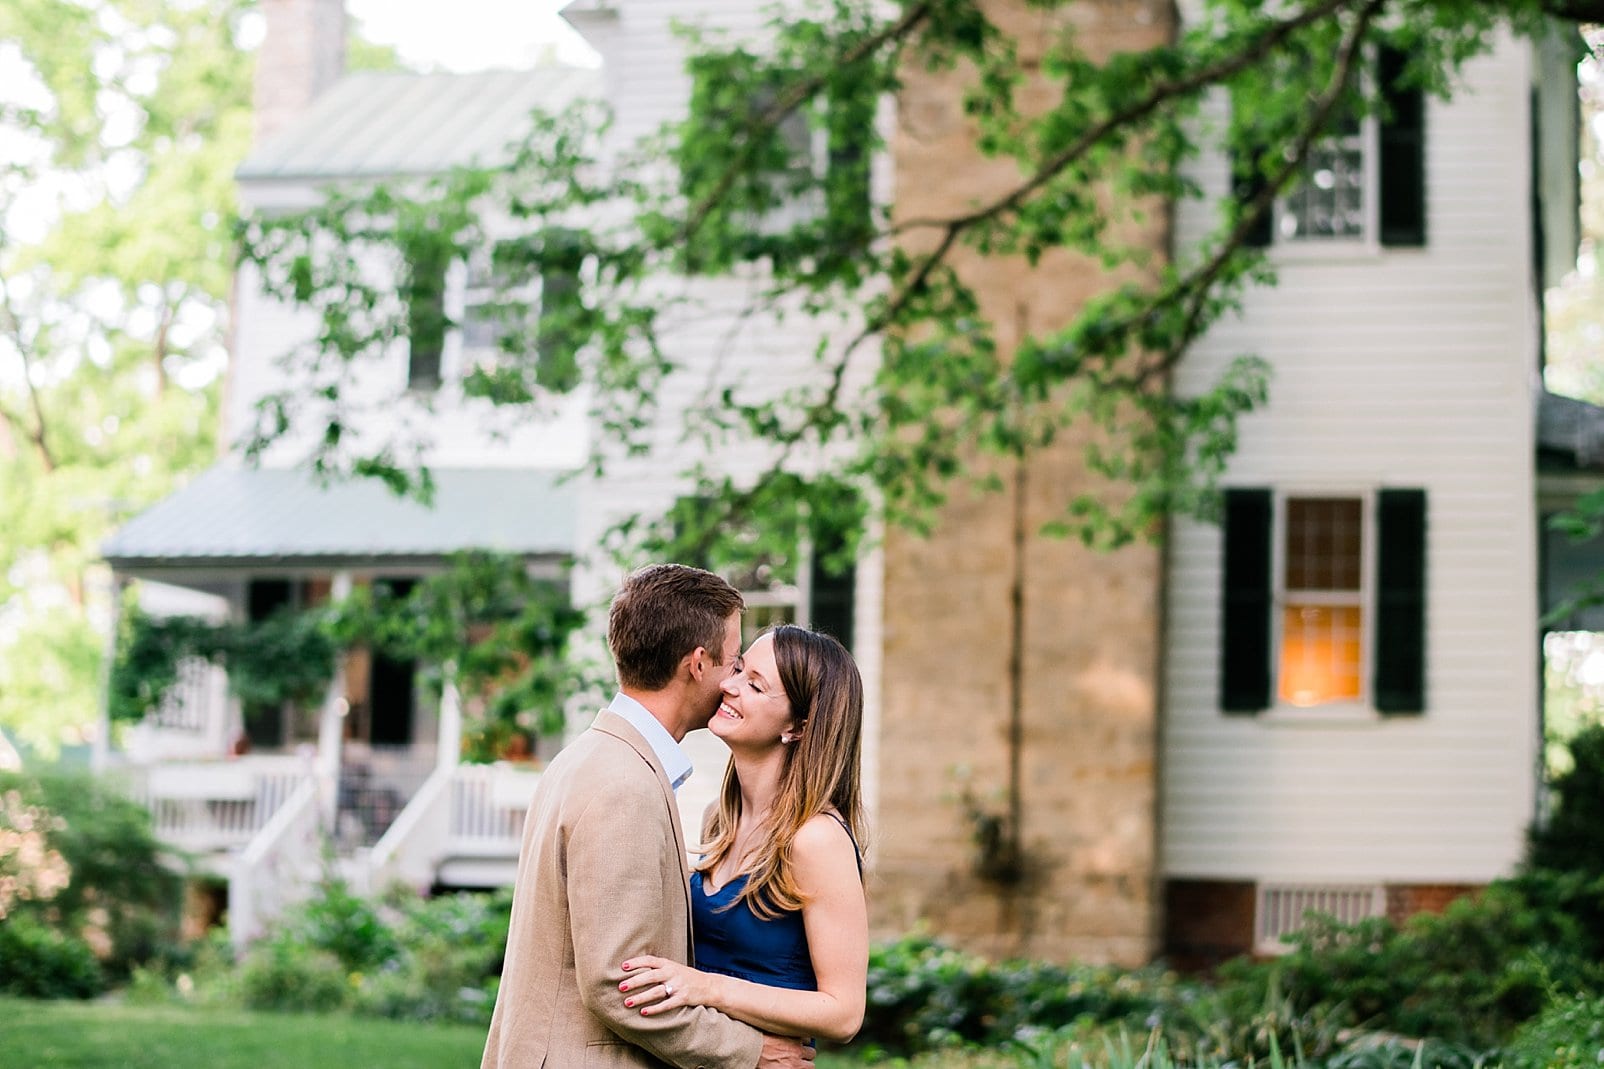 Private estate engagement session in front of childhood home photo